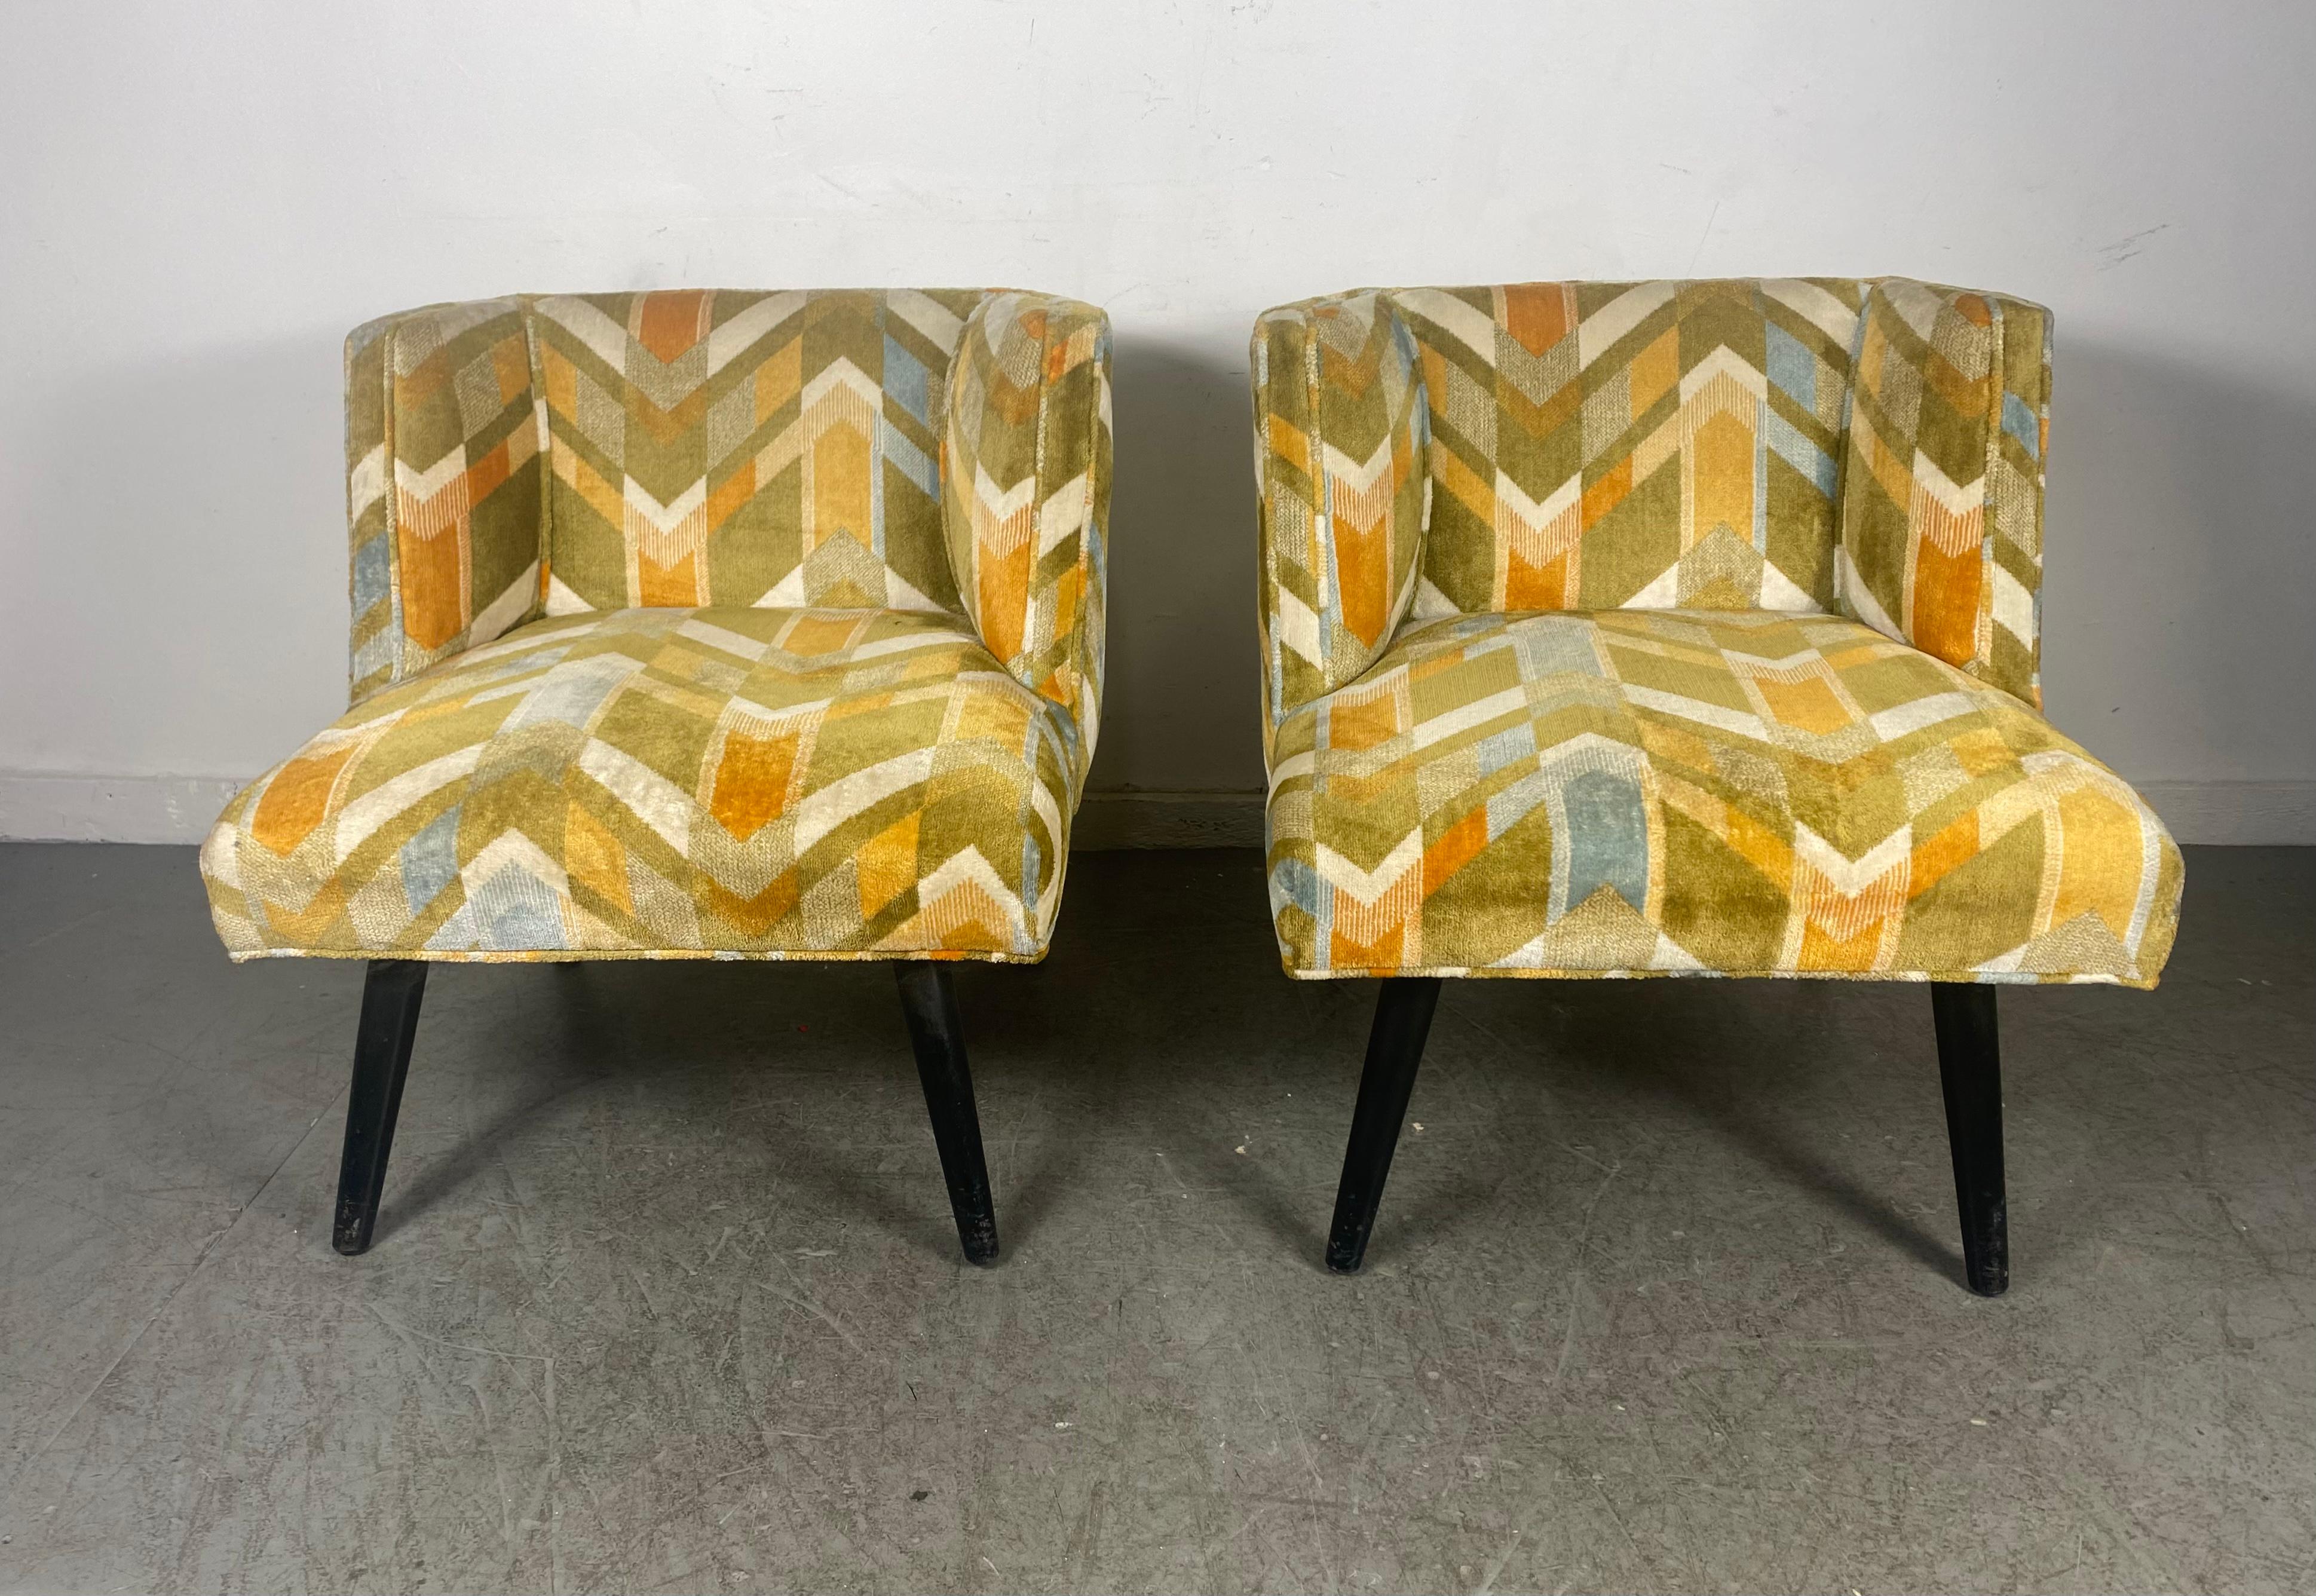 Mid-20th Century Pair Modernist Lounge Chairs, California Modern Manner of James Mont